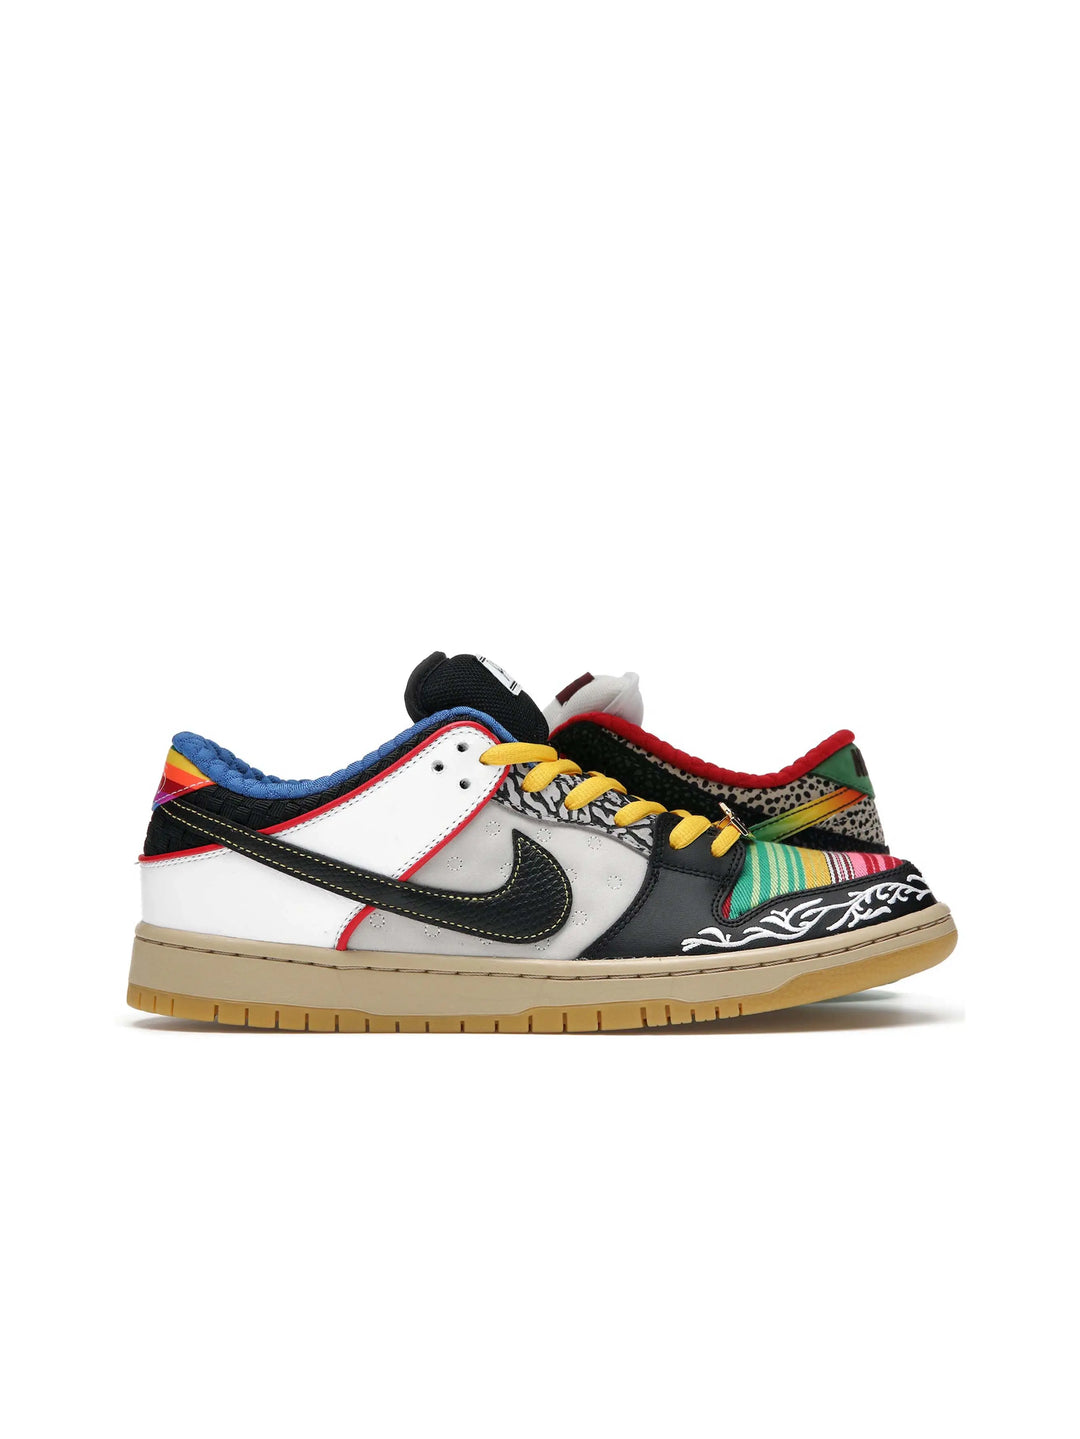 Nike SB Dunk Low What The Paul in Melbourne, Australia - Prior